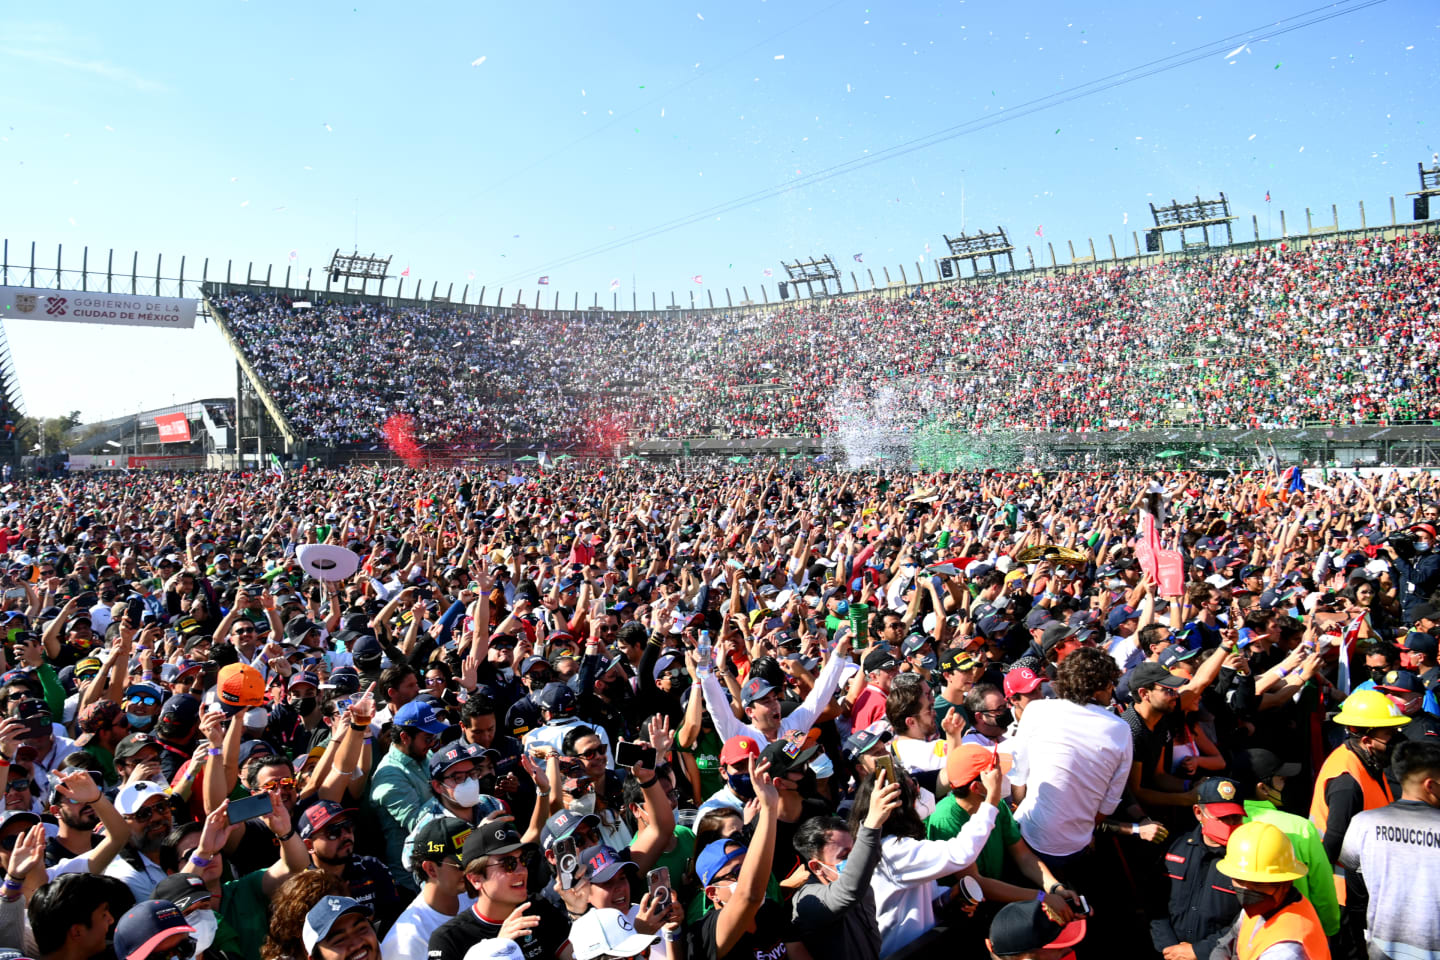 MEXICO CITY, MEXICO - NOVEMBER 07: Fans celebrate at the podium celebrations during the F1 Grand